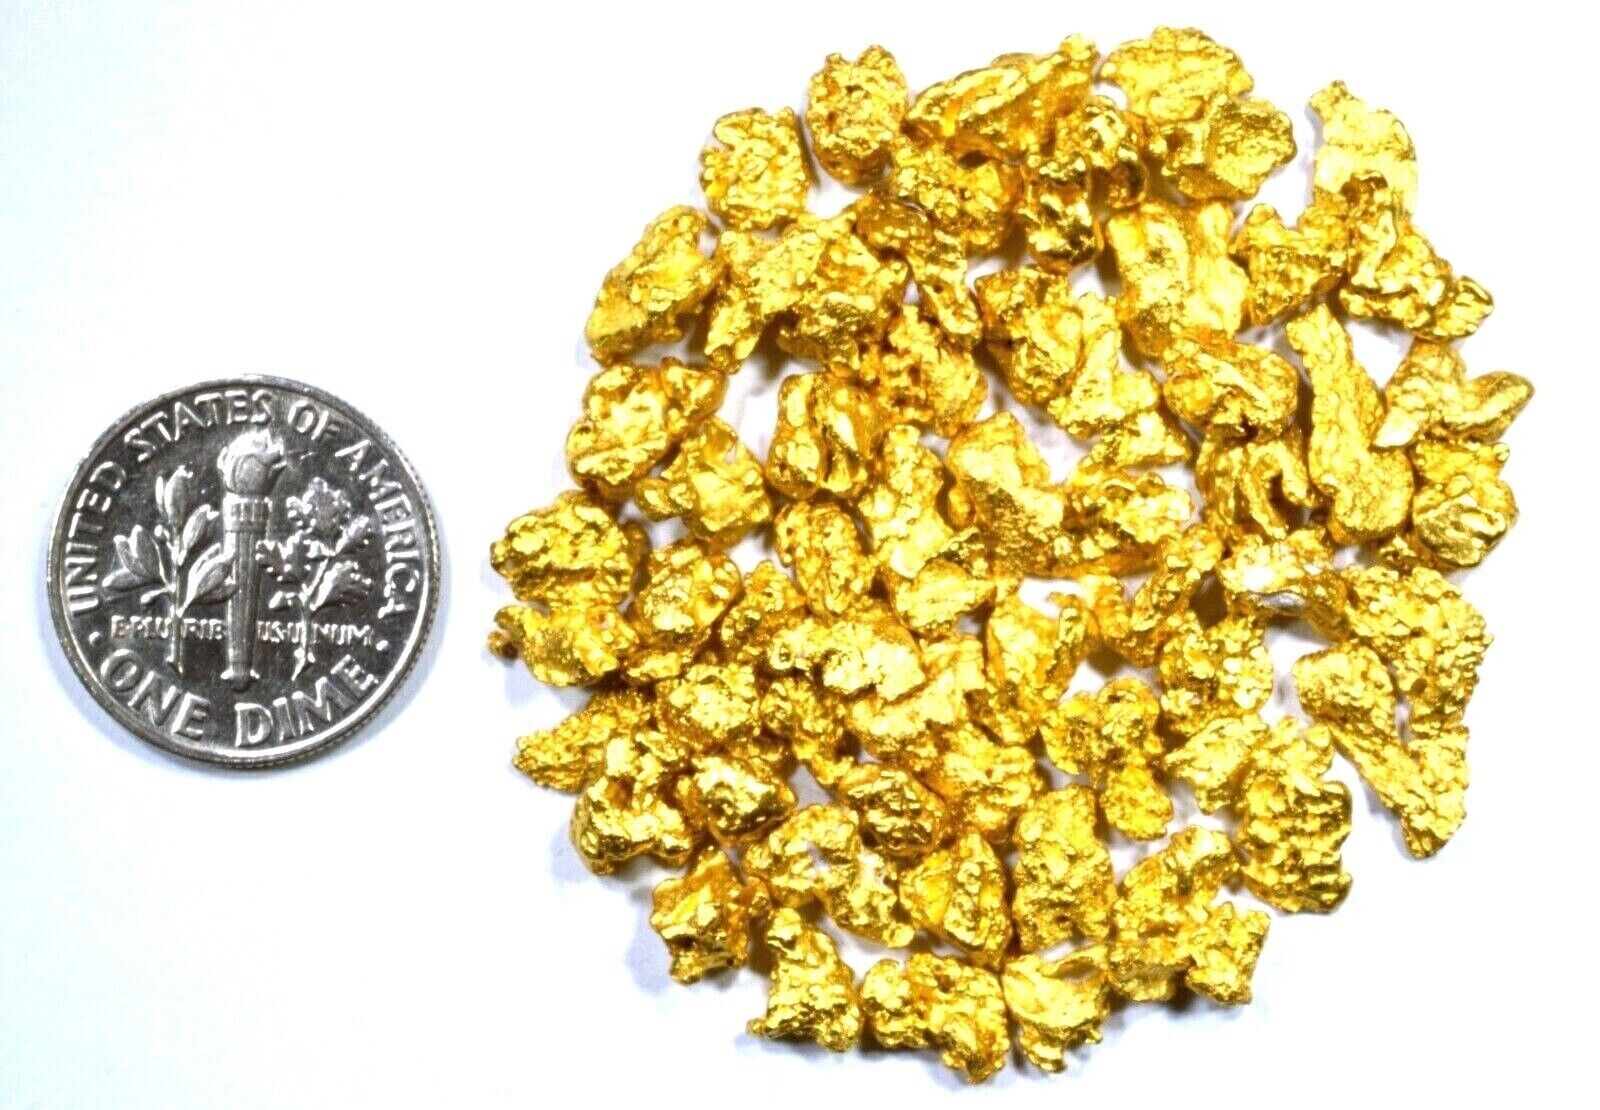 1/2 TROY OZ AUSTRALIAN NATURAL PURE GOLD NUGGETS #6 MESH WITH BOTTLE (#AUB600)